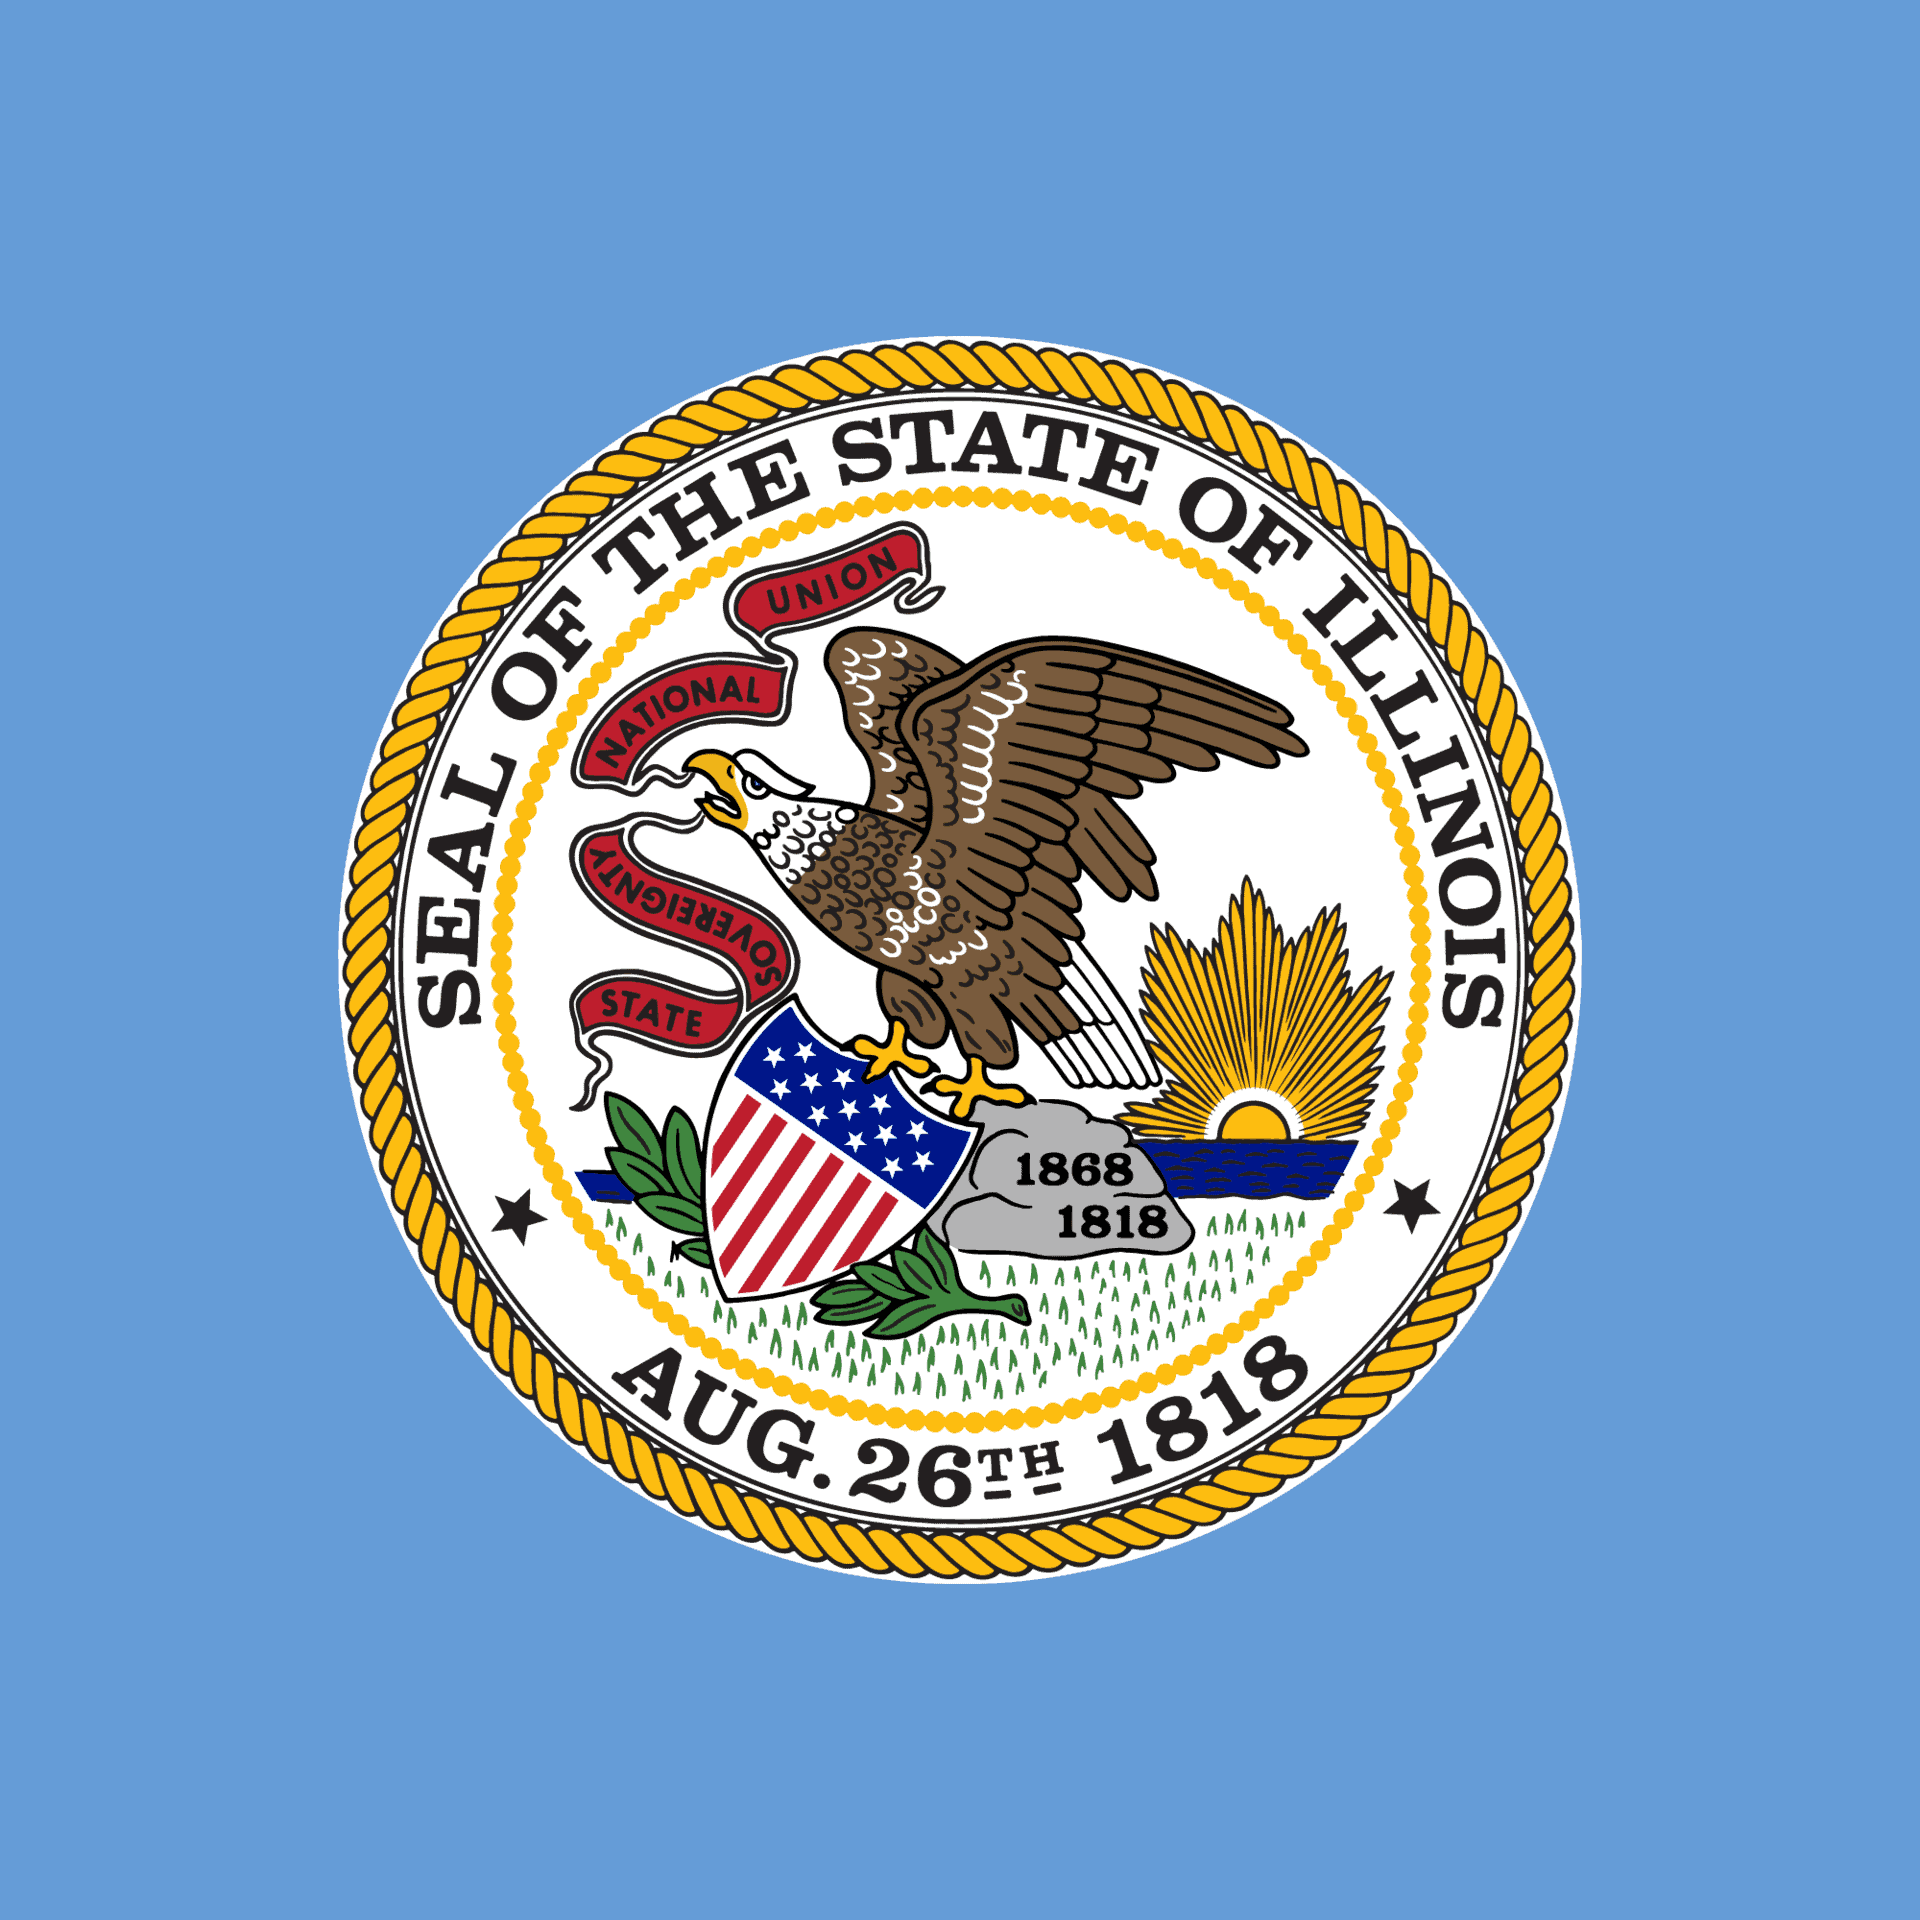 The seal of the state of illinois on a blue background.